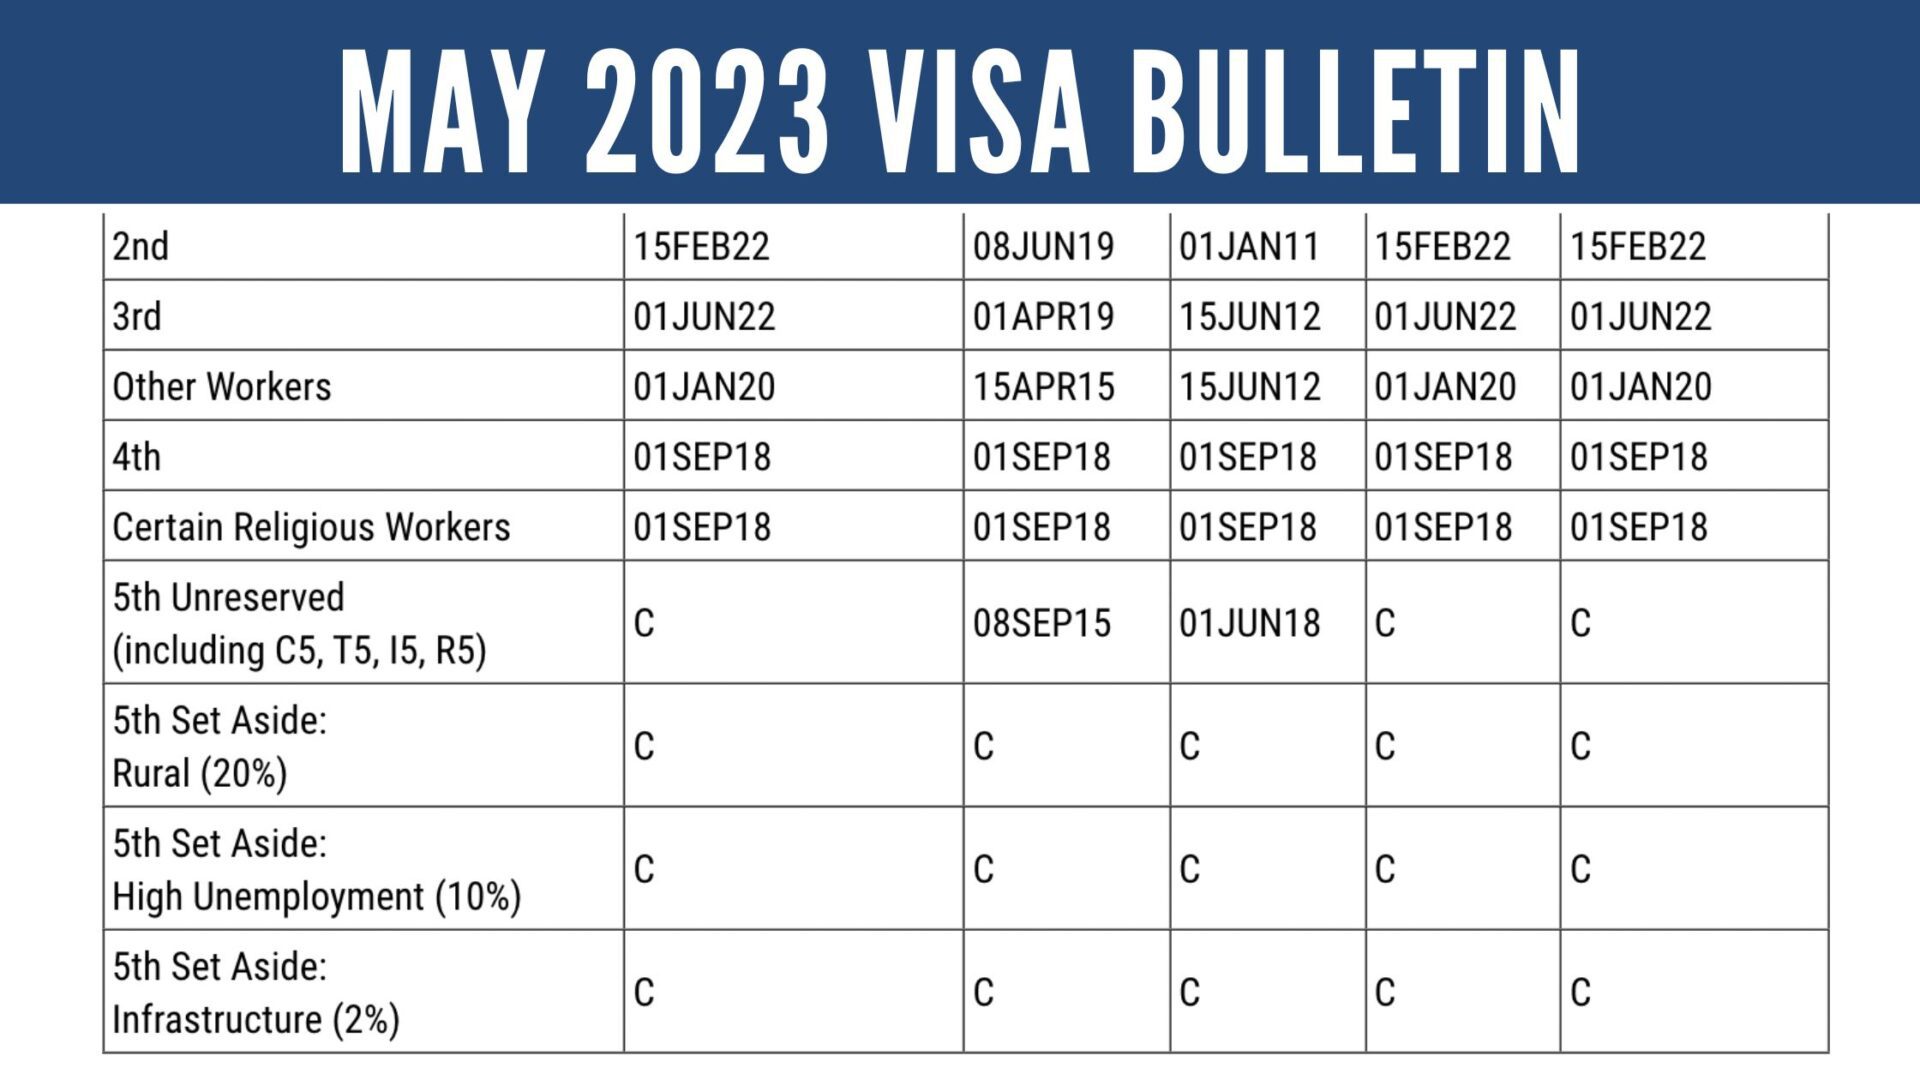 May 2023 Visa Bulletin: China EB-5 Final Action Date Advances While No Change for India Cut-Off Dates